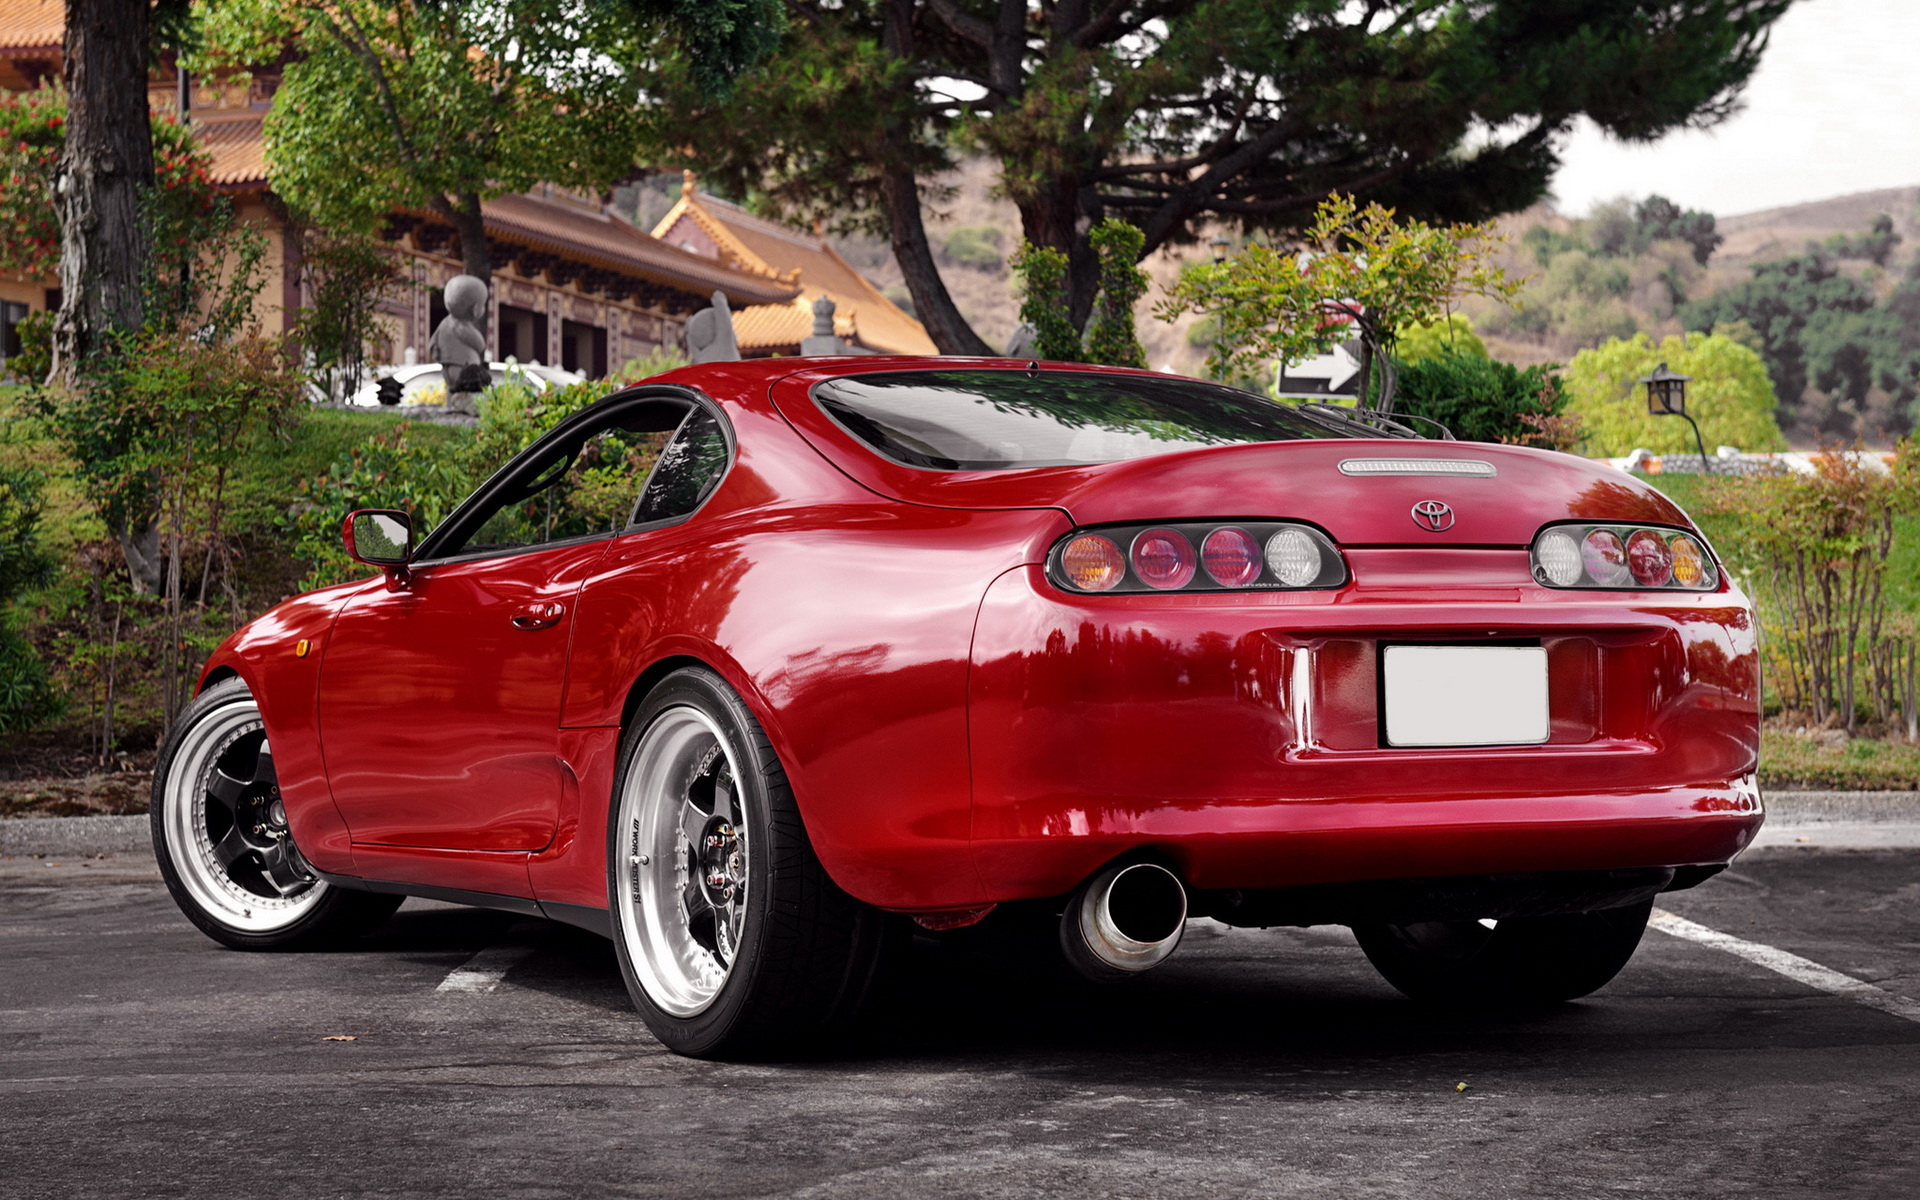 Toyota Supra wallpapers and images - wallpapers, pictures, photos